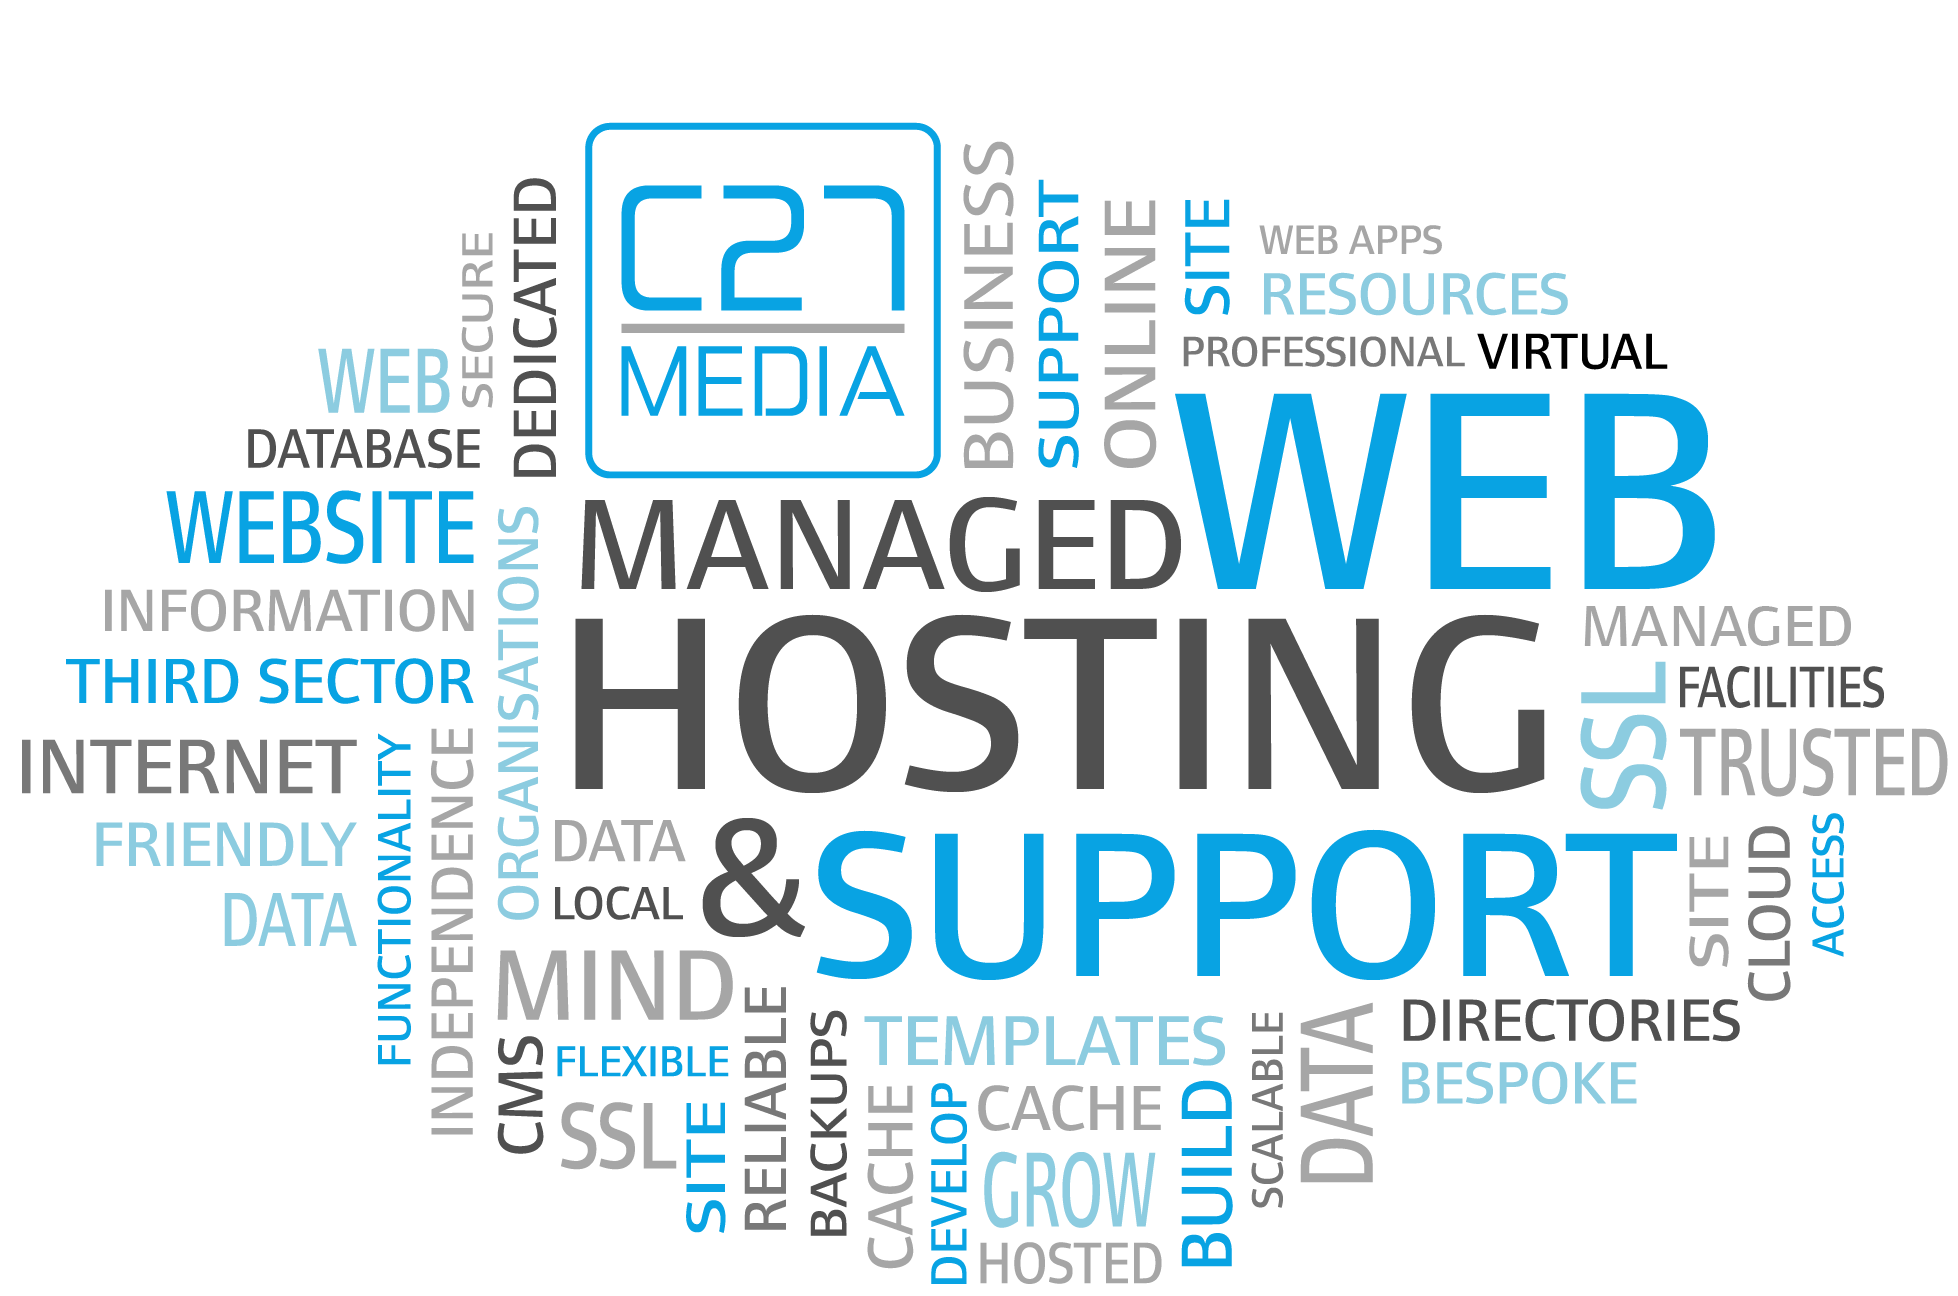 Word cloud representing C27 Media hosting and support